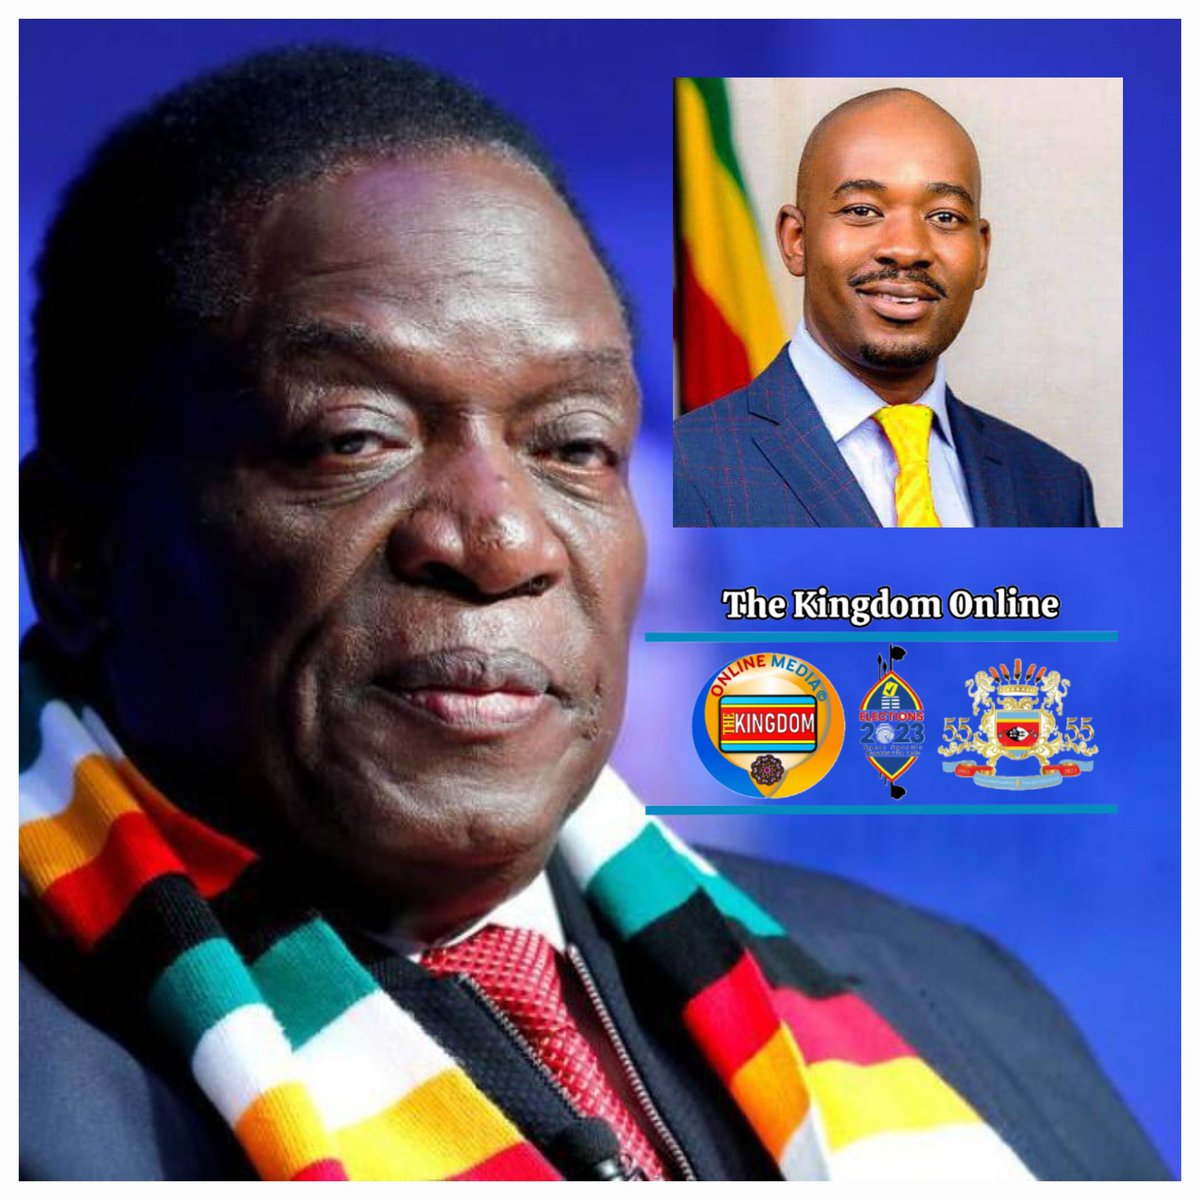 🔴⚠️ MULTIPARTY WAS NEVER MADE FOR AFRICA;

The elections in Zimbabwe are rigged because Nelson Chamisa didn't win. In multiparty, elections are always rigged anyway, according to opposition. Eswatini has a leading democracy that is not partisan. 
#ZimbabweElections
#Eswatini